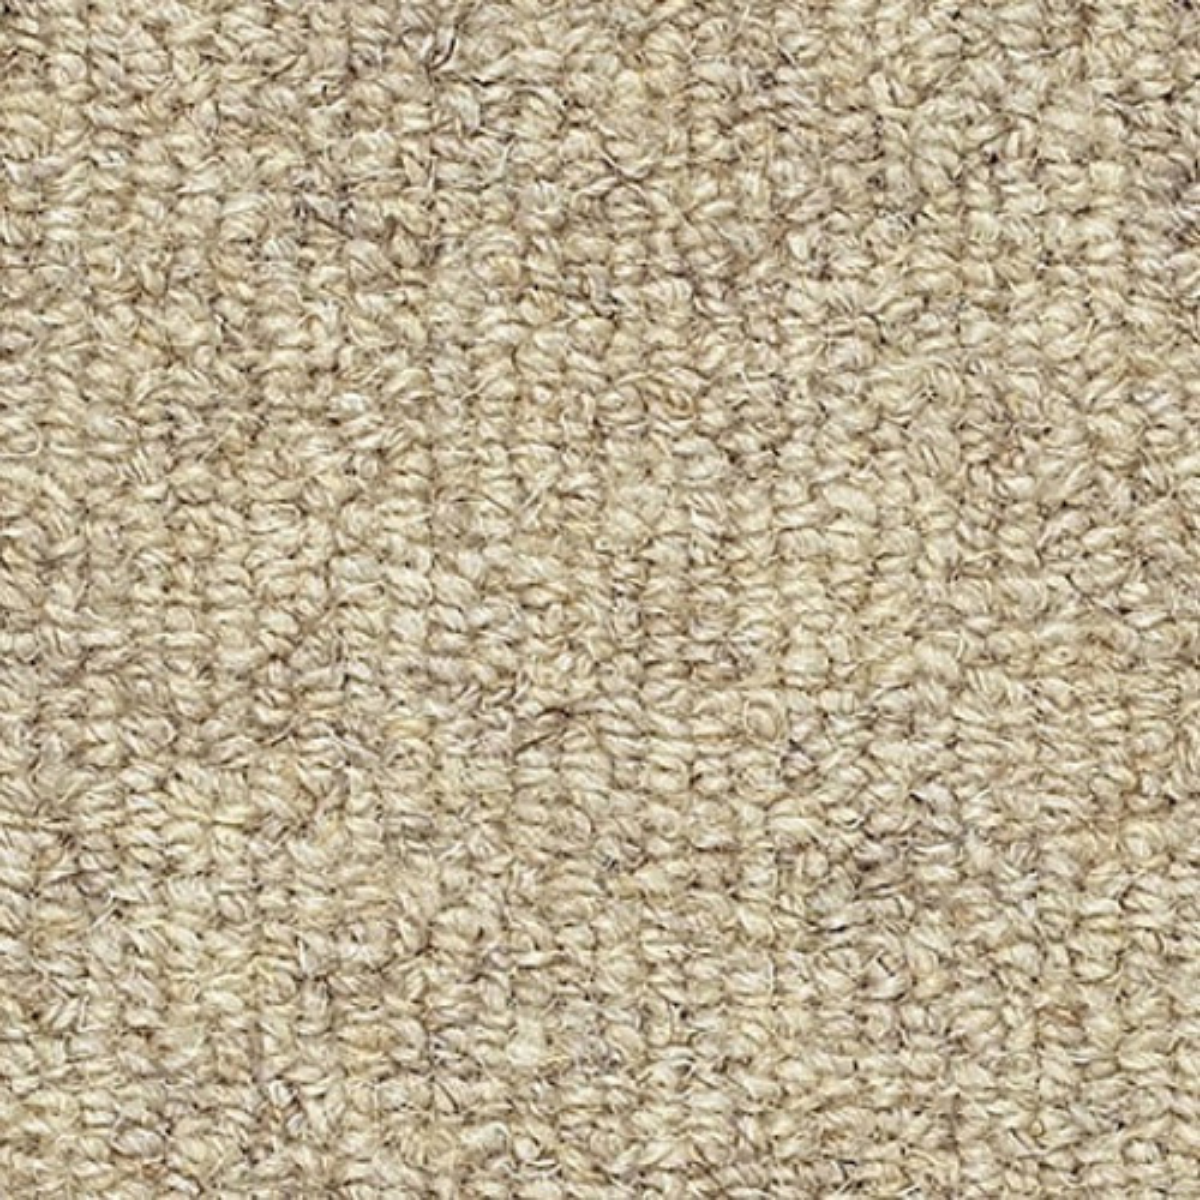 Earth Weave Carpet, Dolomite Style/Snowfield Color